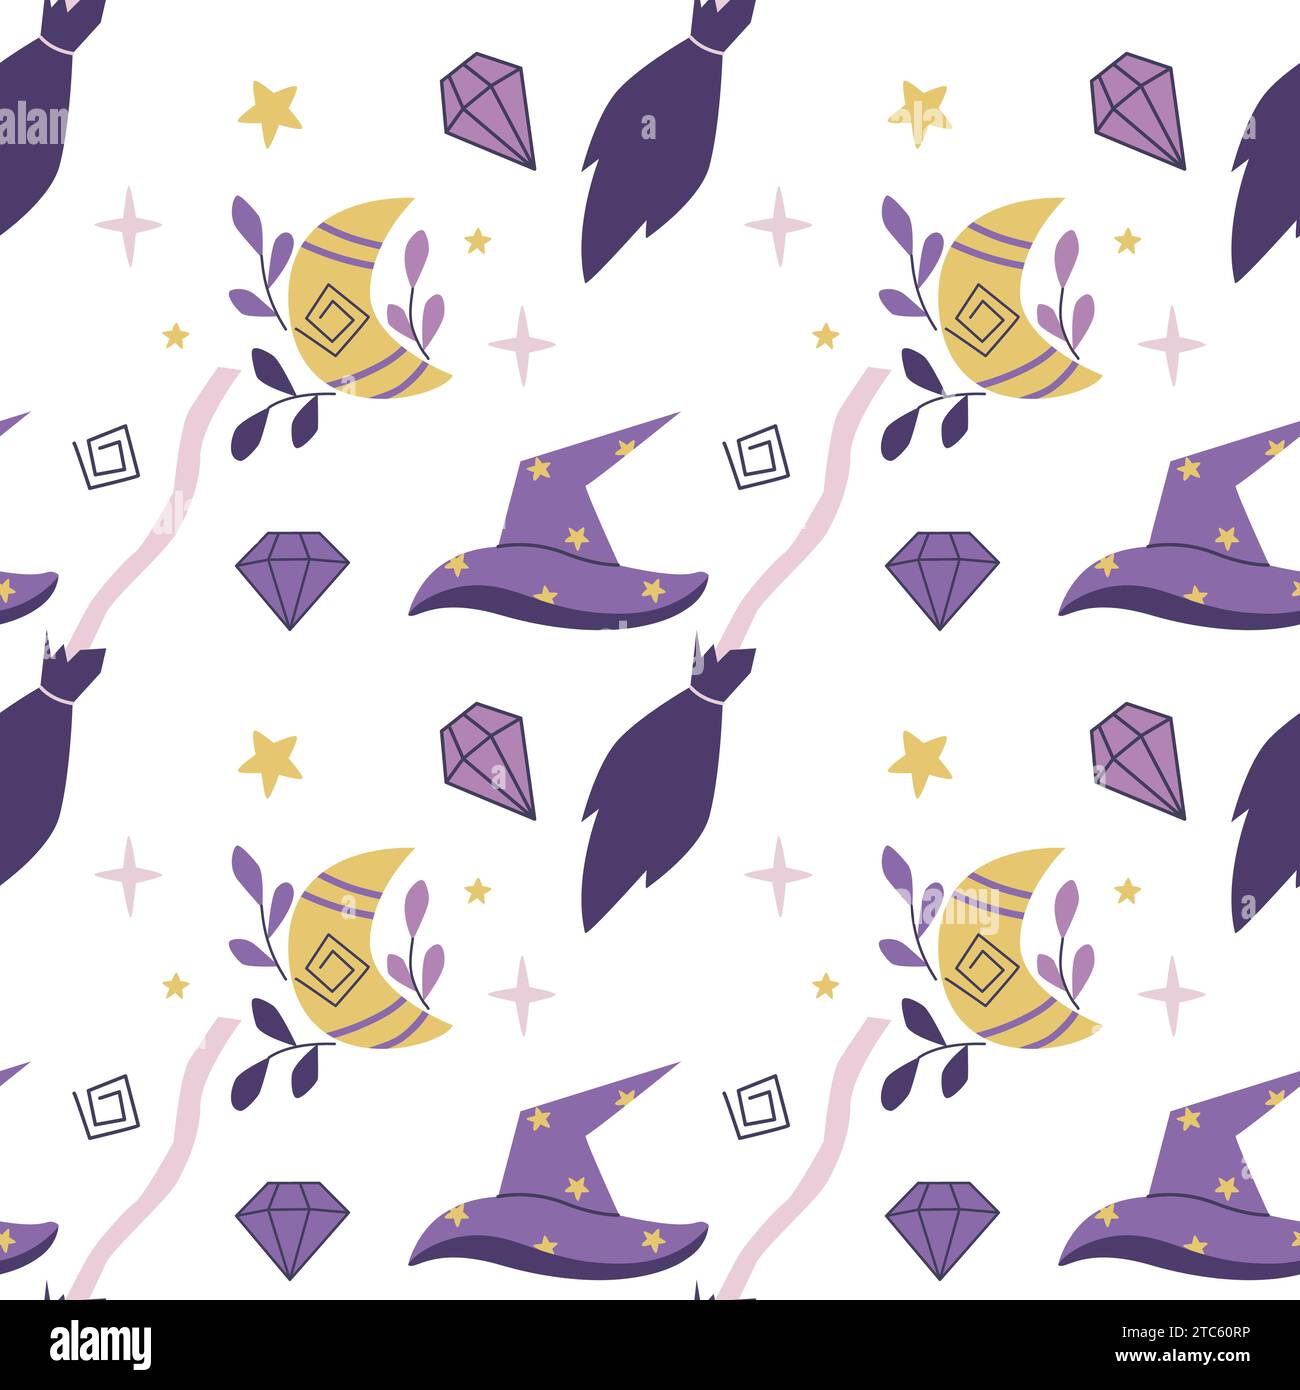 Witch hat and broom magic seamless pattern. Symbols of witchcraft and wizardry background. Hand drawn moon, crystals, magic hat and stars, print Stock Vector